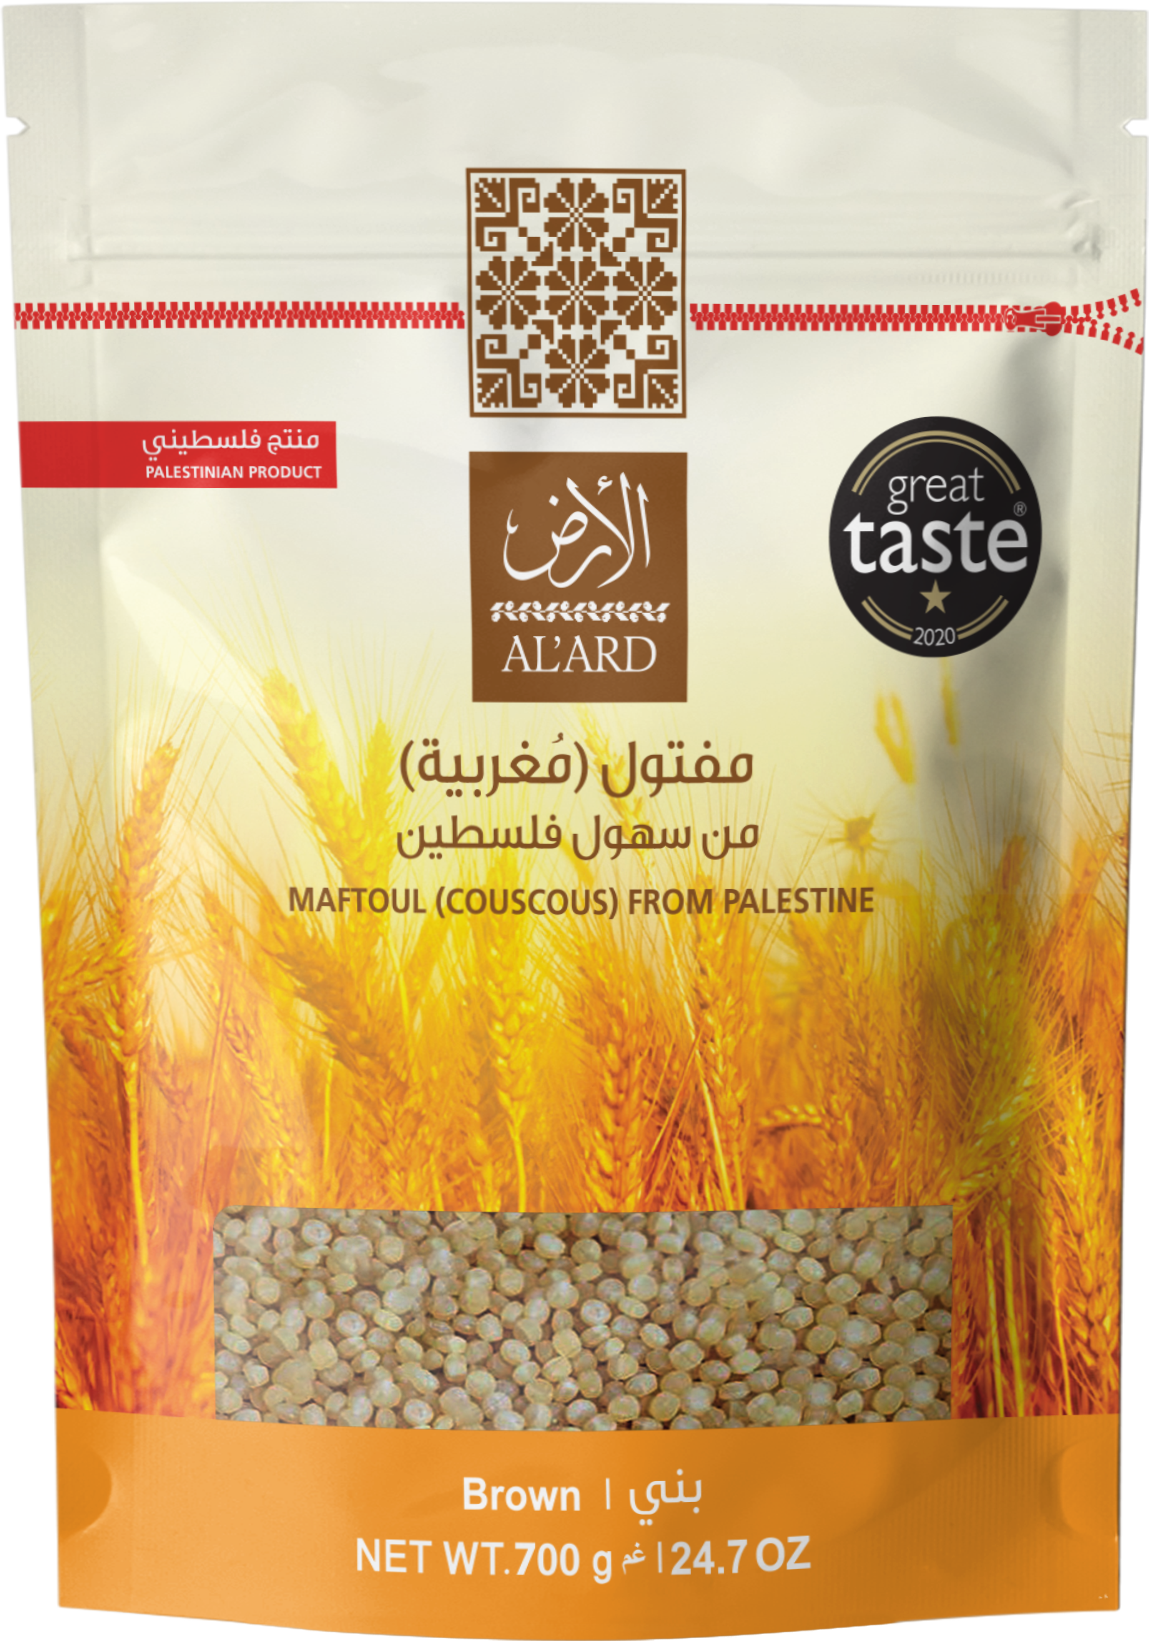 700g Maftool (couscous) from the plains of Palestine